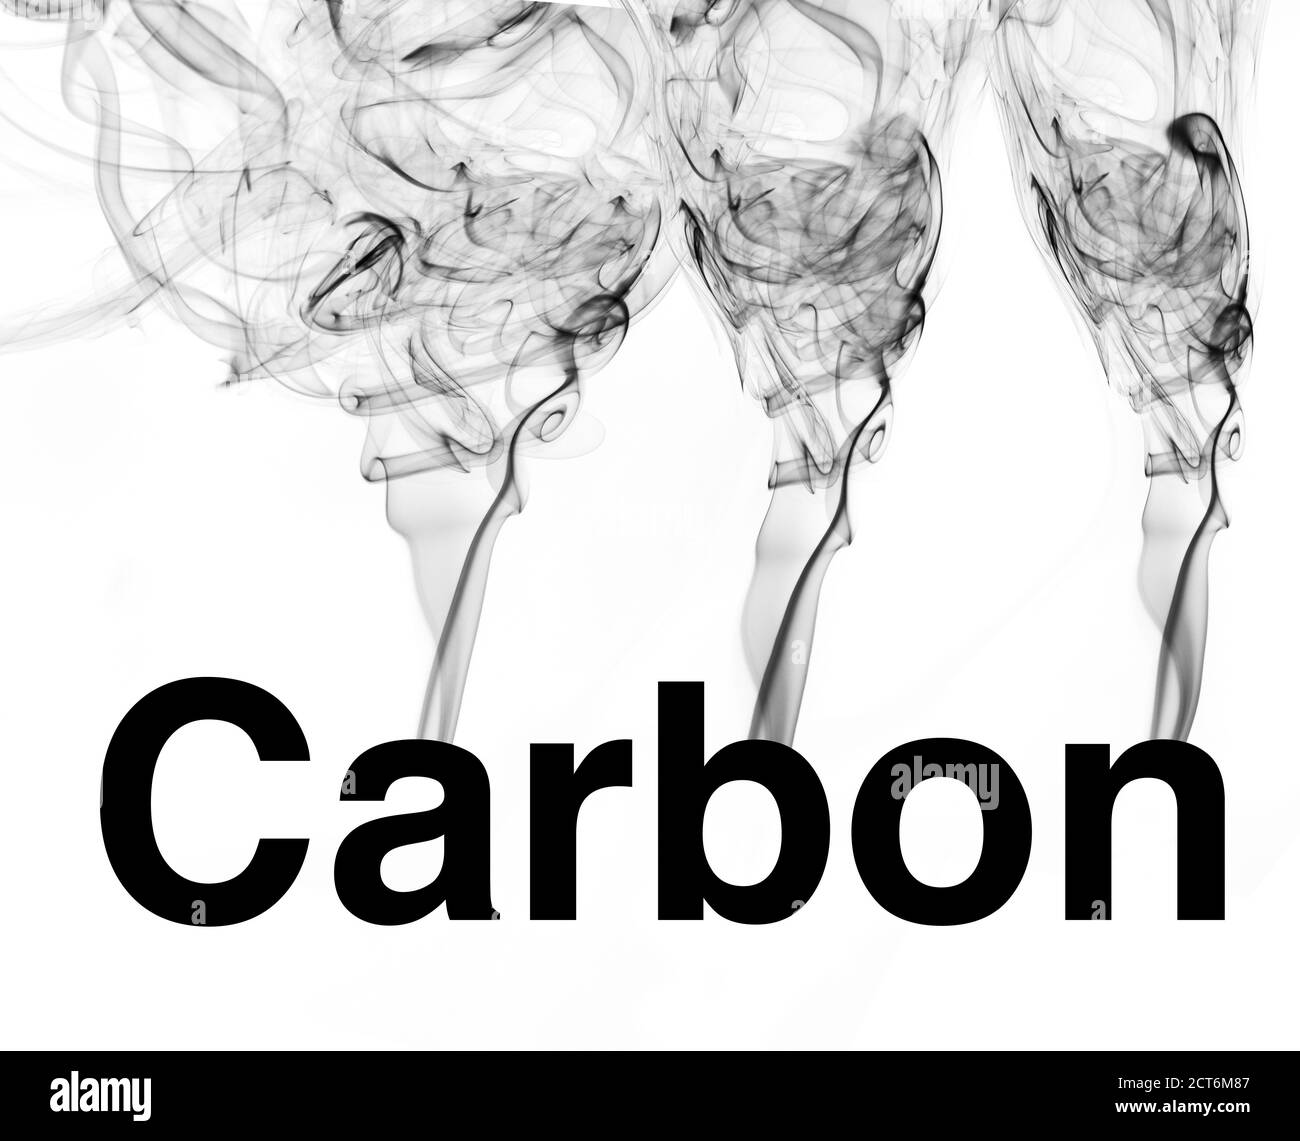 Smoke emerging from carbon. Stock Photo